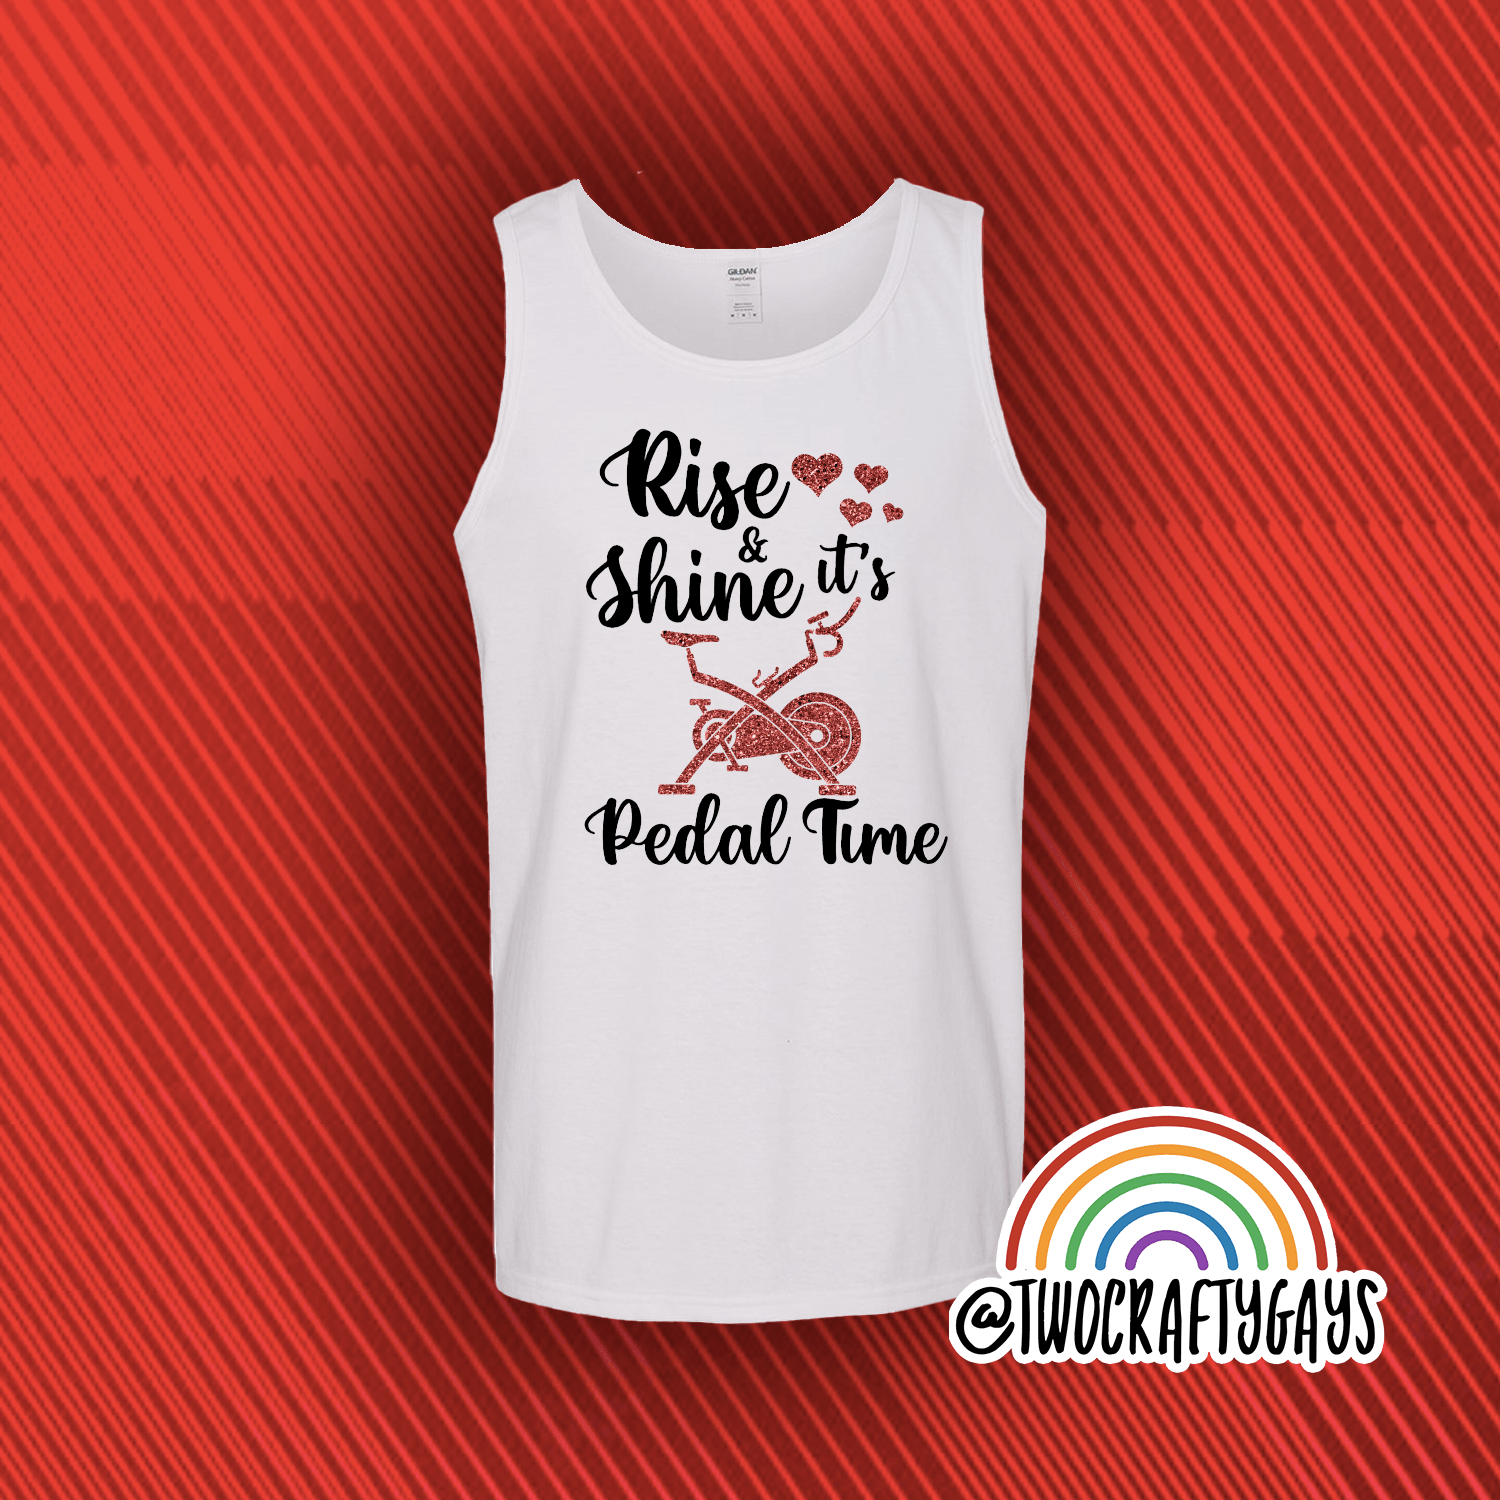 "Pedal Time" Shirt & Tank - Two Crafty Gays